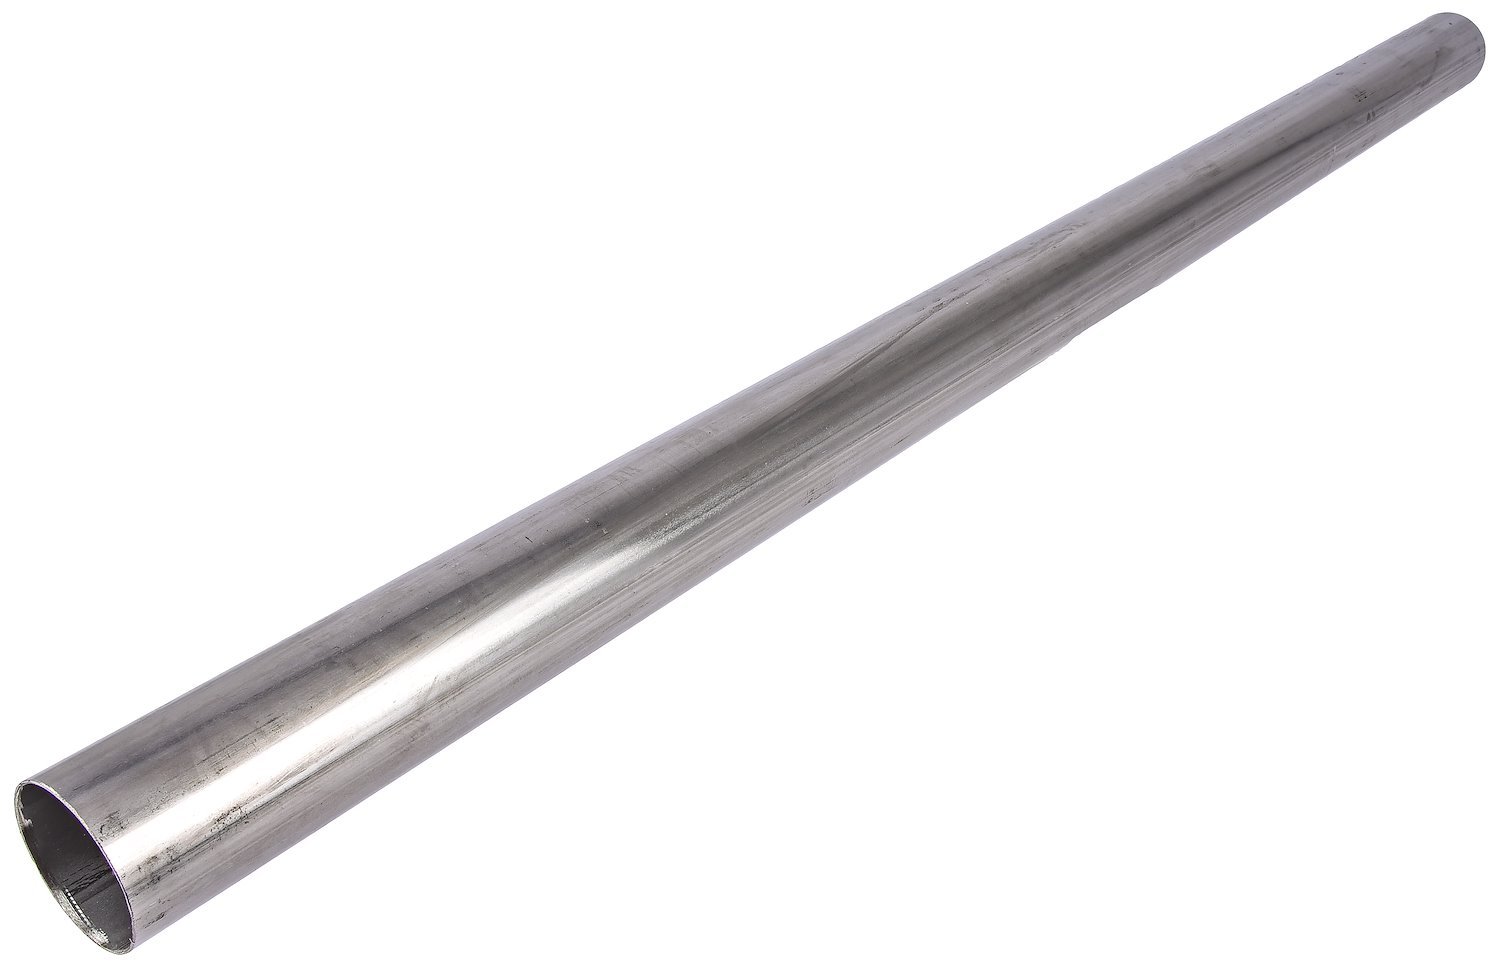 Stainless Steel Exhaust Tubing 2.500 in. OD x 4 ft. L